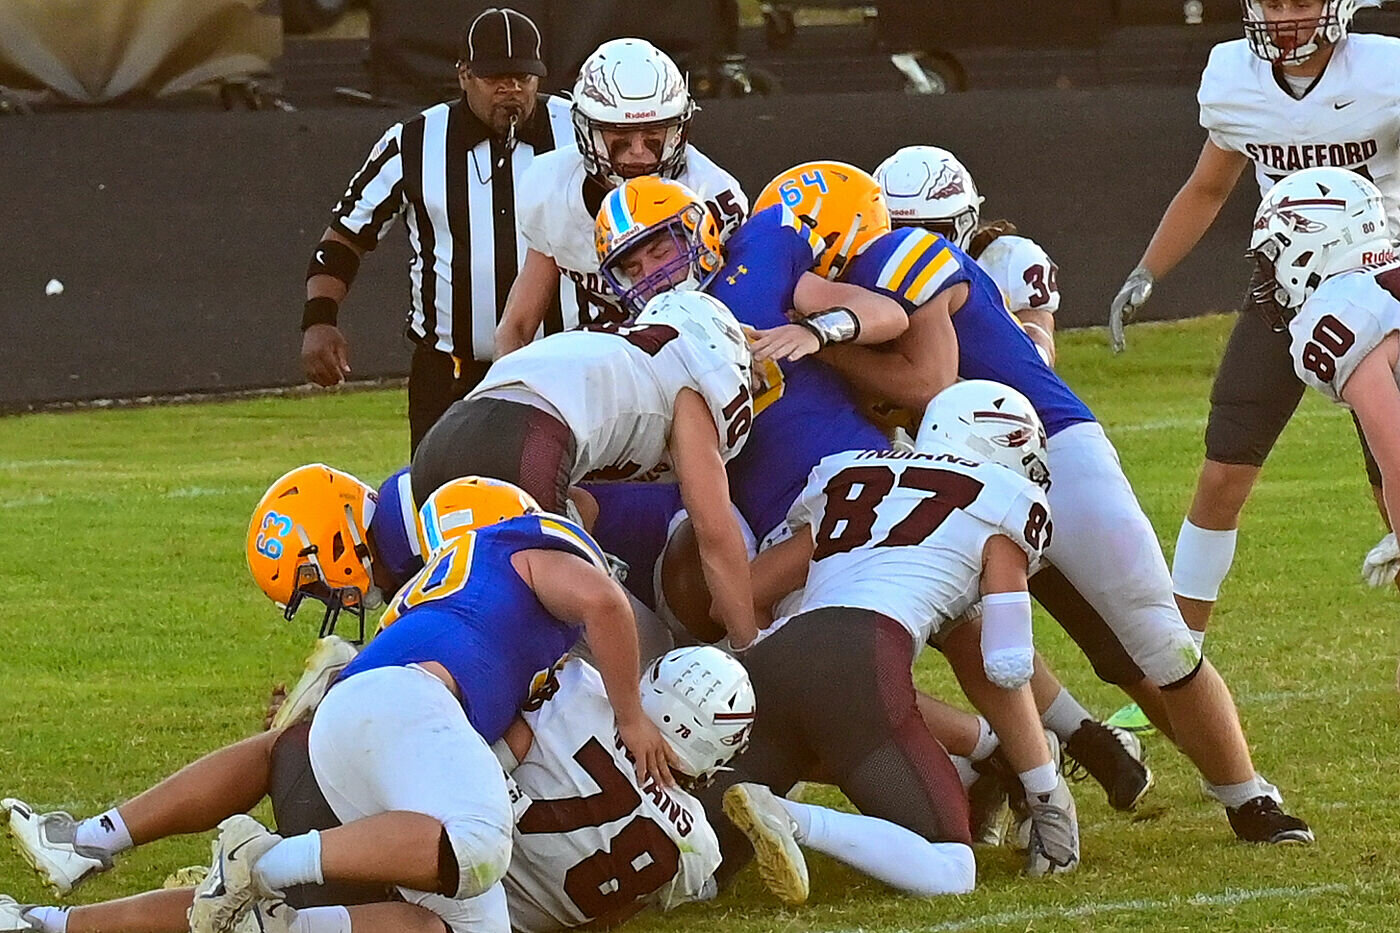 Dog pile at Strafford's game vs. Ava.


Contributed photo by Buddy Chronister 